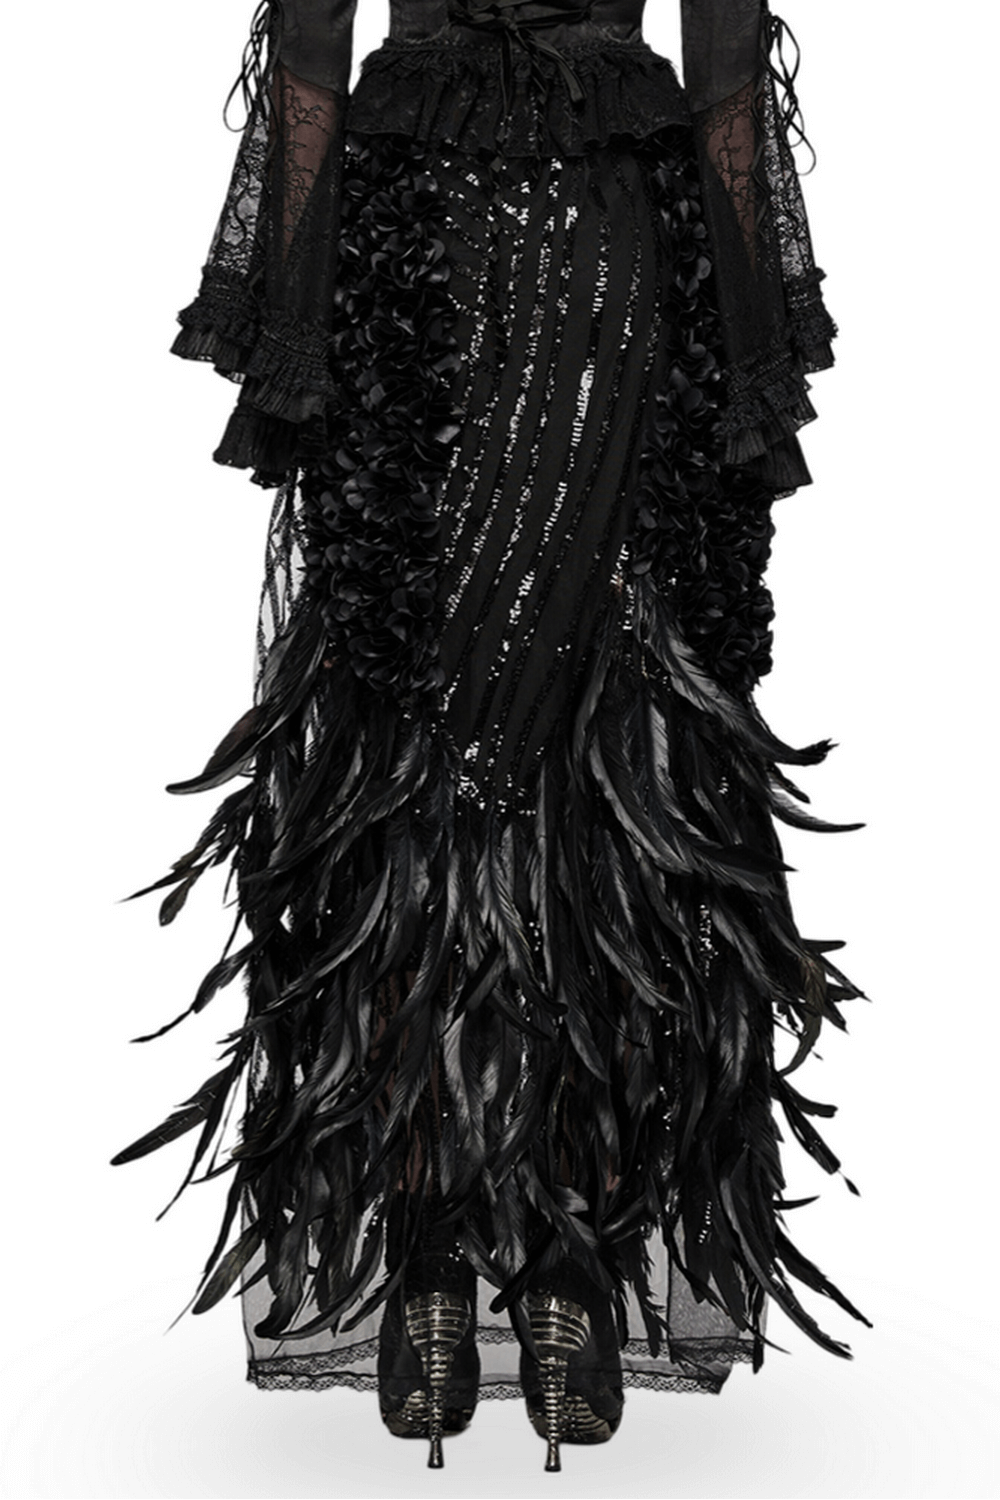 Elegant Black Gothic Feathered Skirt with Rose Petals